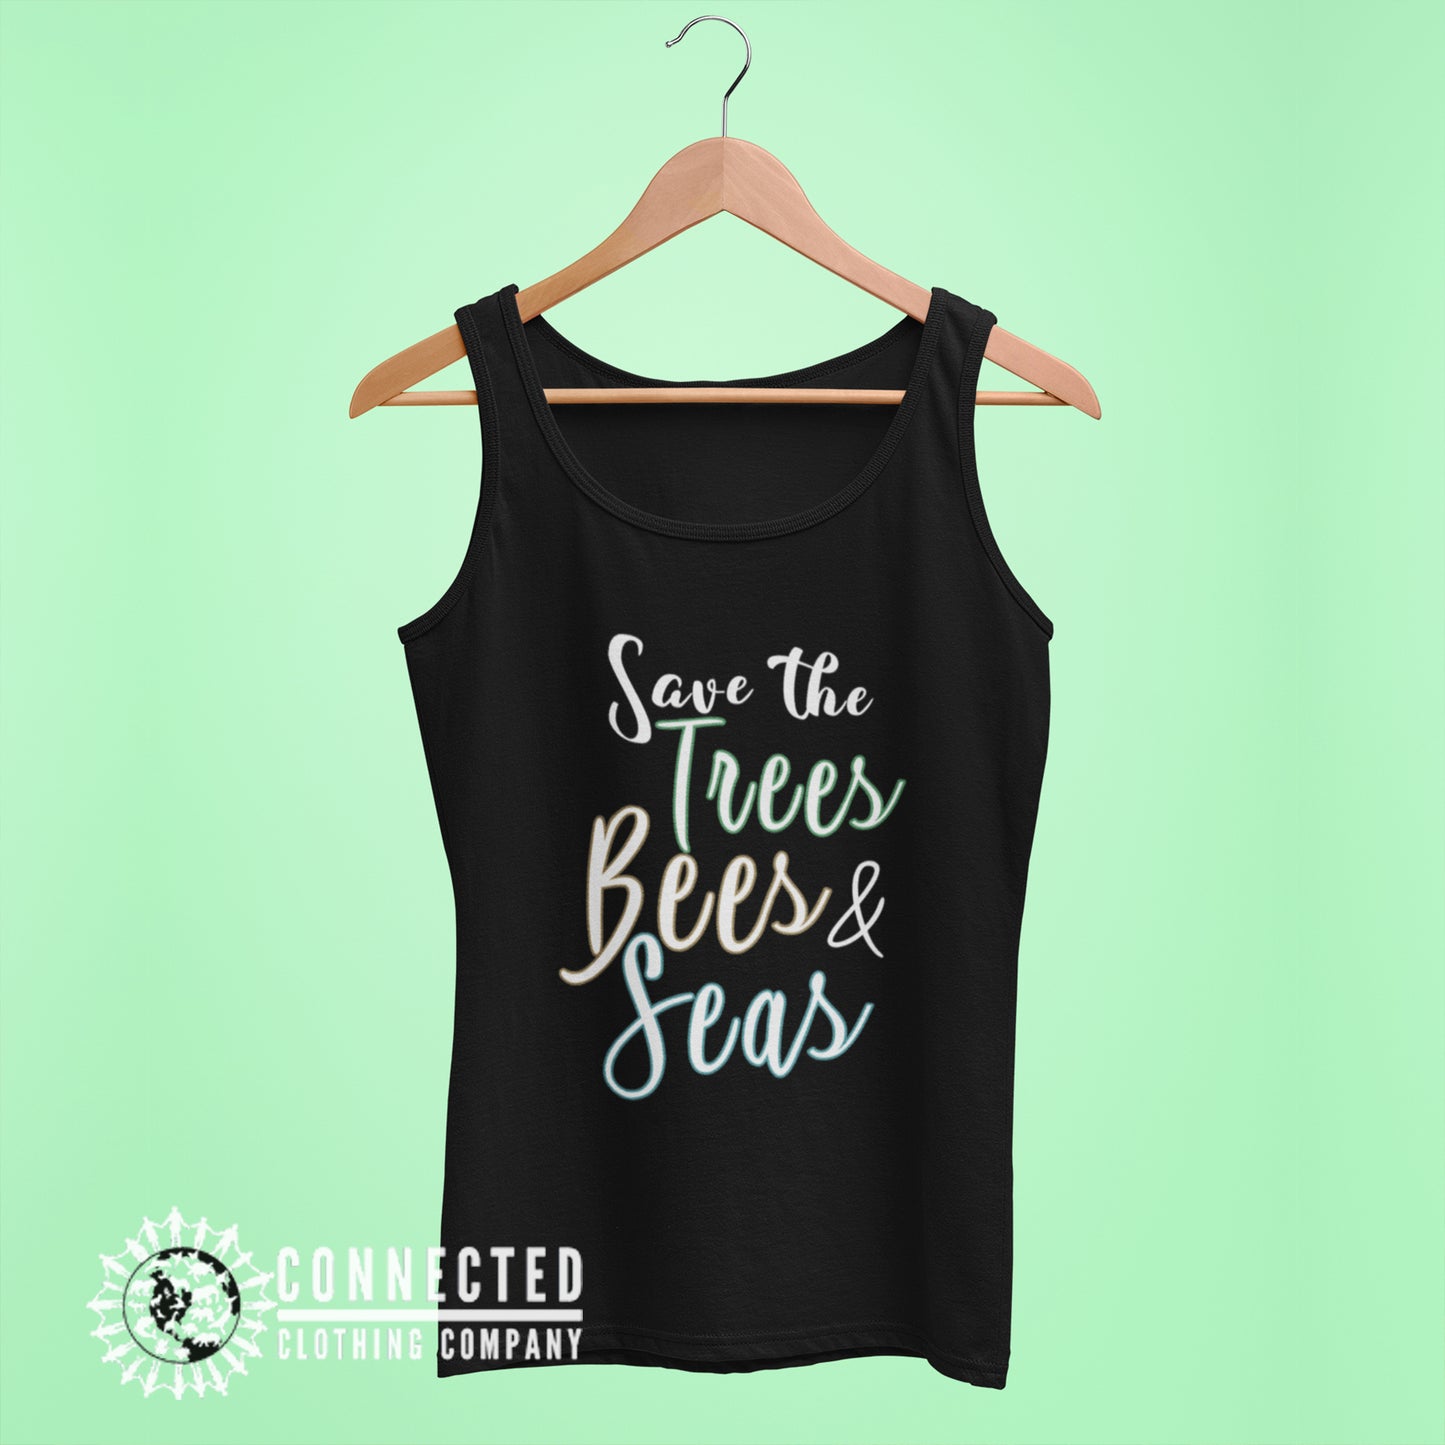 Black Save The Trees Bees And Seas Women's Relaxed Tank Top - Connected Clothing Company - Ethically and Sustainably Made - 10% donated to Mission Blue ocean conservation